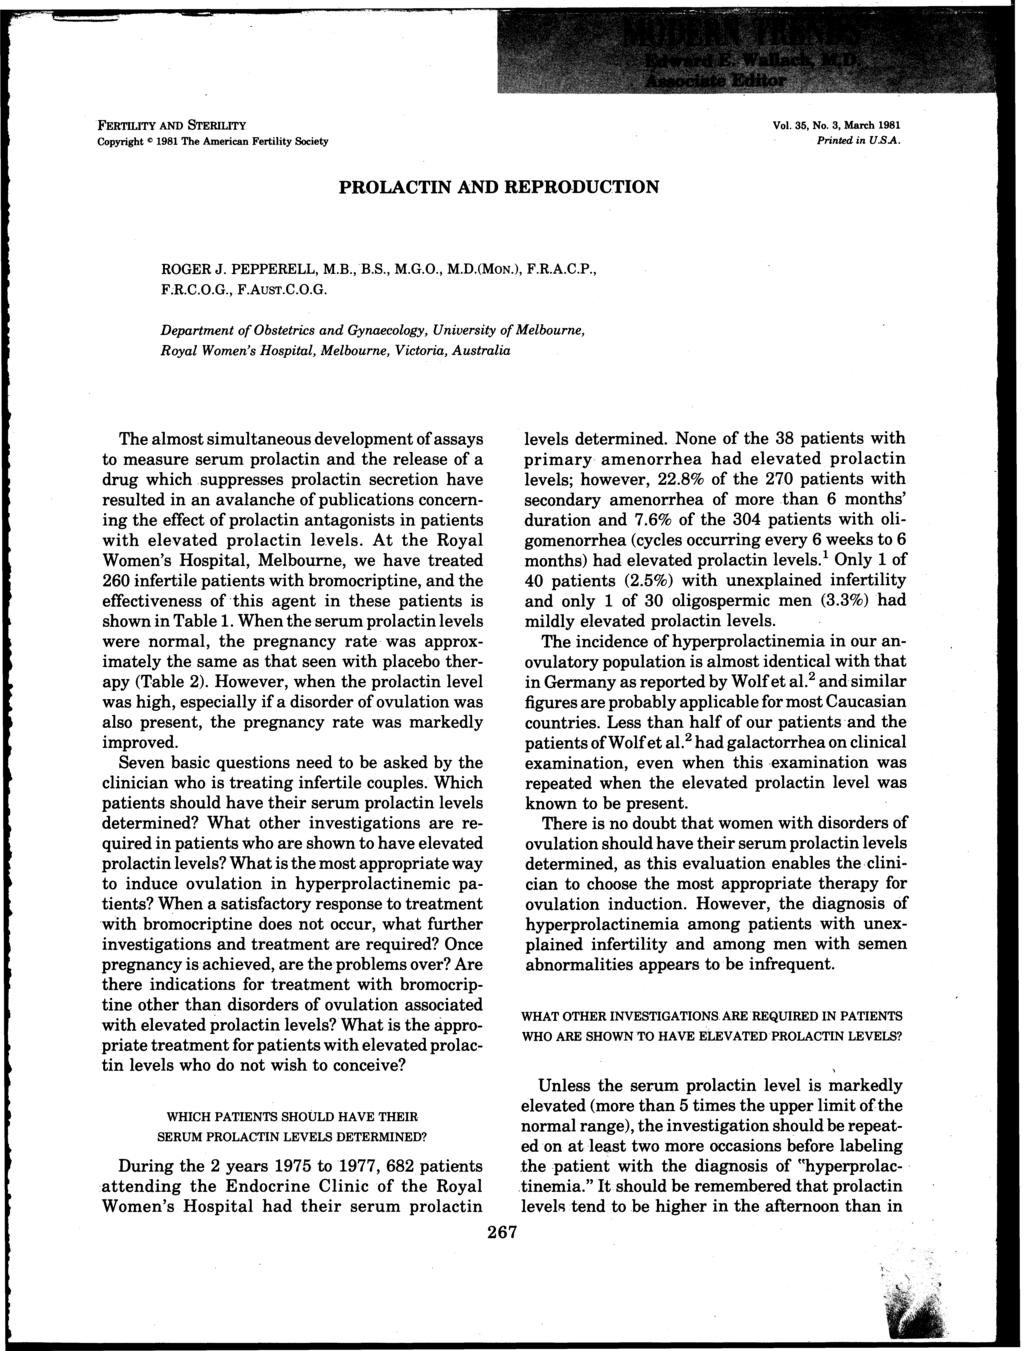 FERTILITY AND STERILITY Copyright" 1981 The American Fertility Society Vol. 35, No.3, Man:h 1981 Printed in U.SA. PROLACTIN AND REPRODUCTION ROGER J. PEPPERELL, M.B.,B.S., M.G.O., M.D.(MoN.), F.R.A.C.P., F;R.